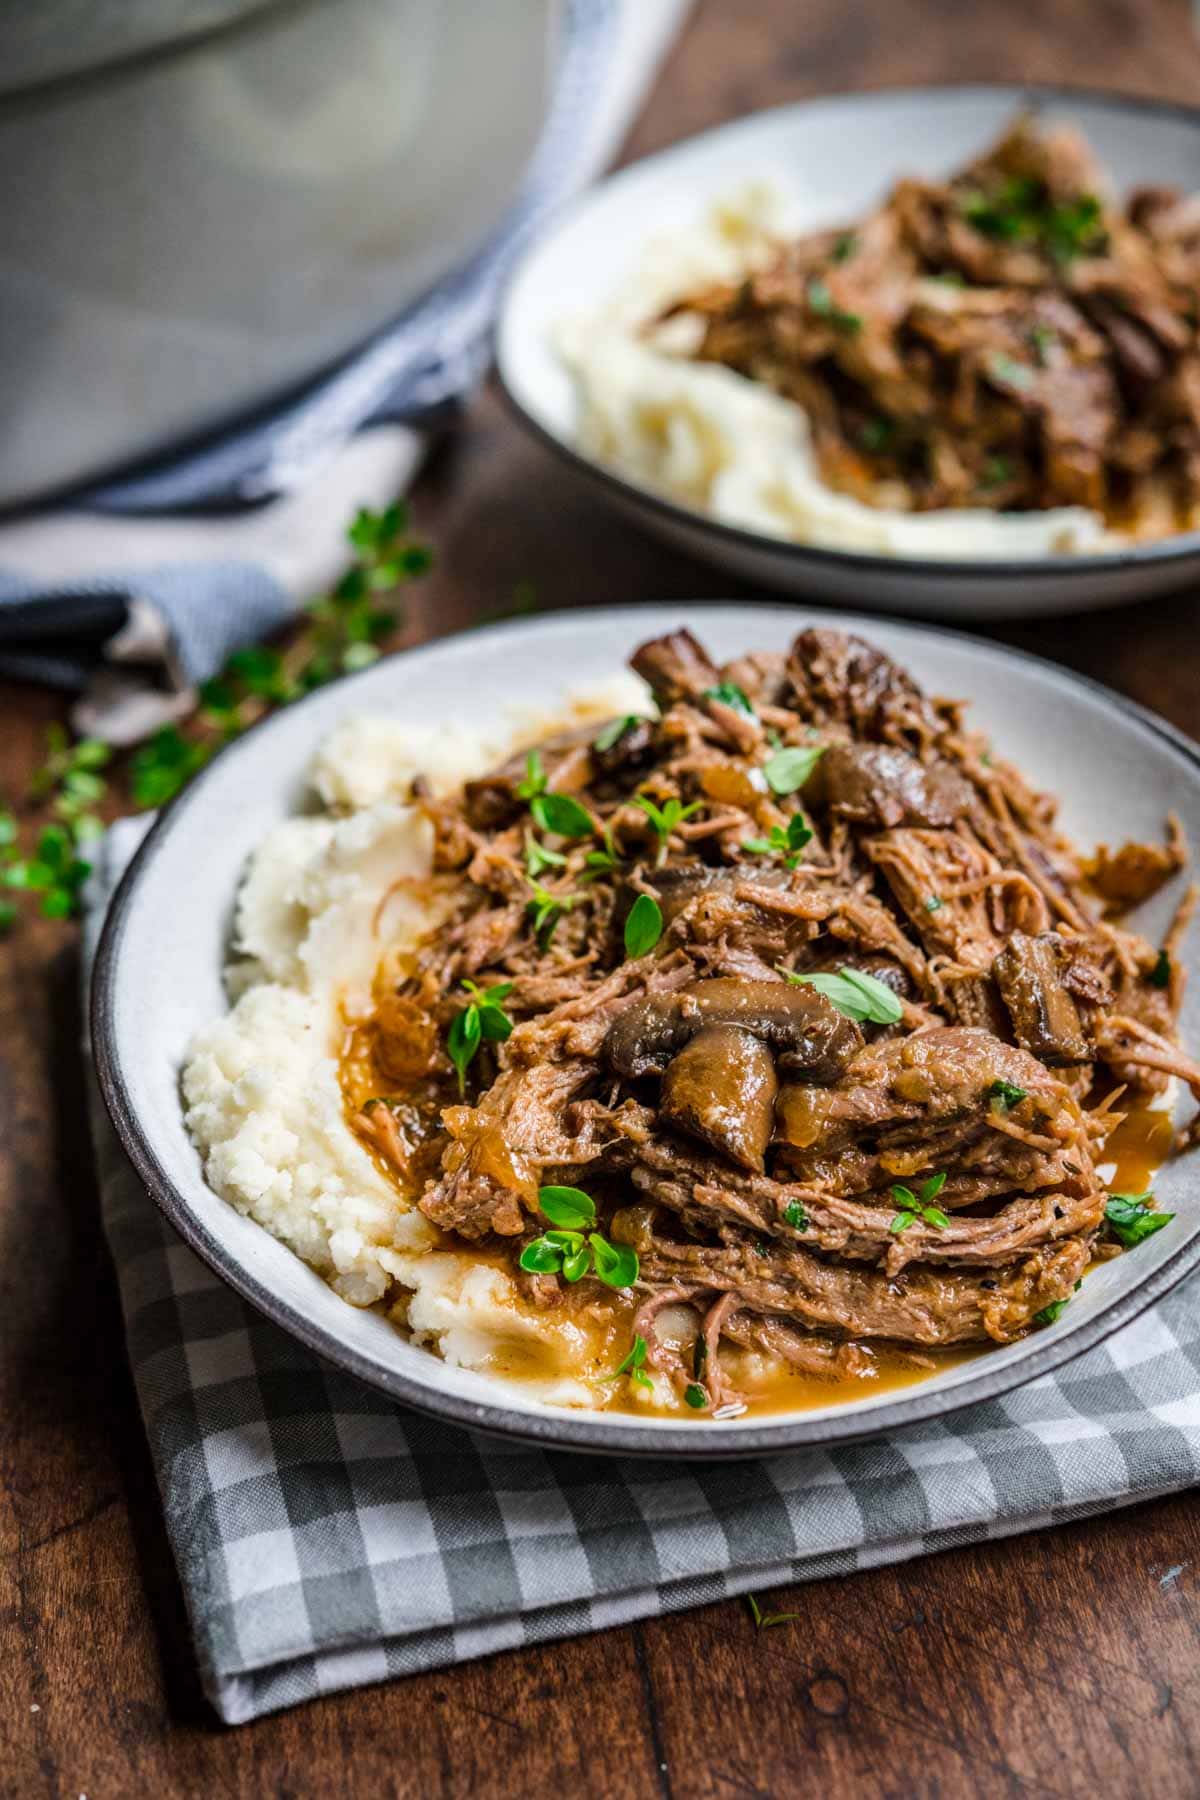 Mushroom Beef Roast shredded and garnished with fresh parsley served over mashed potatoes